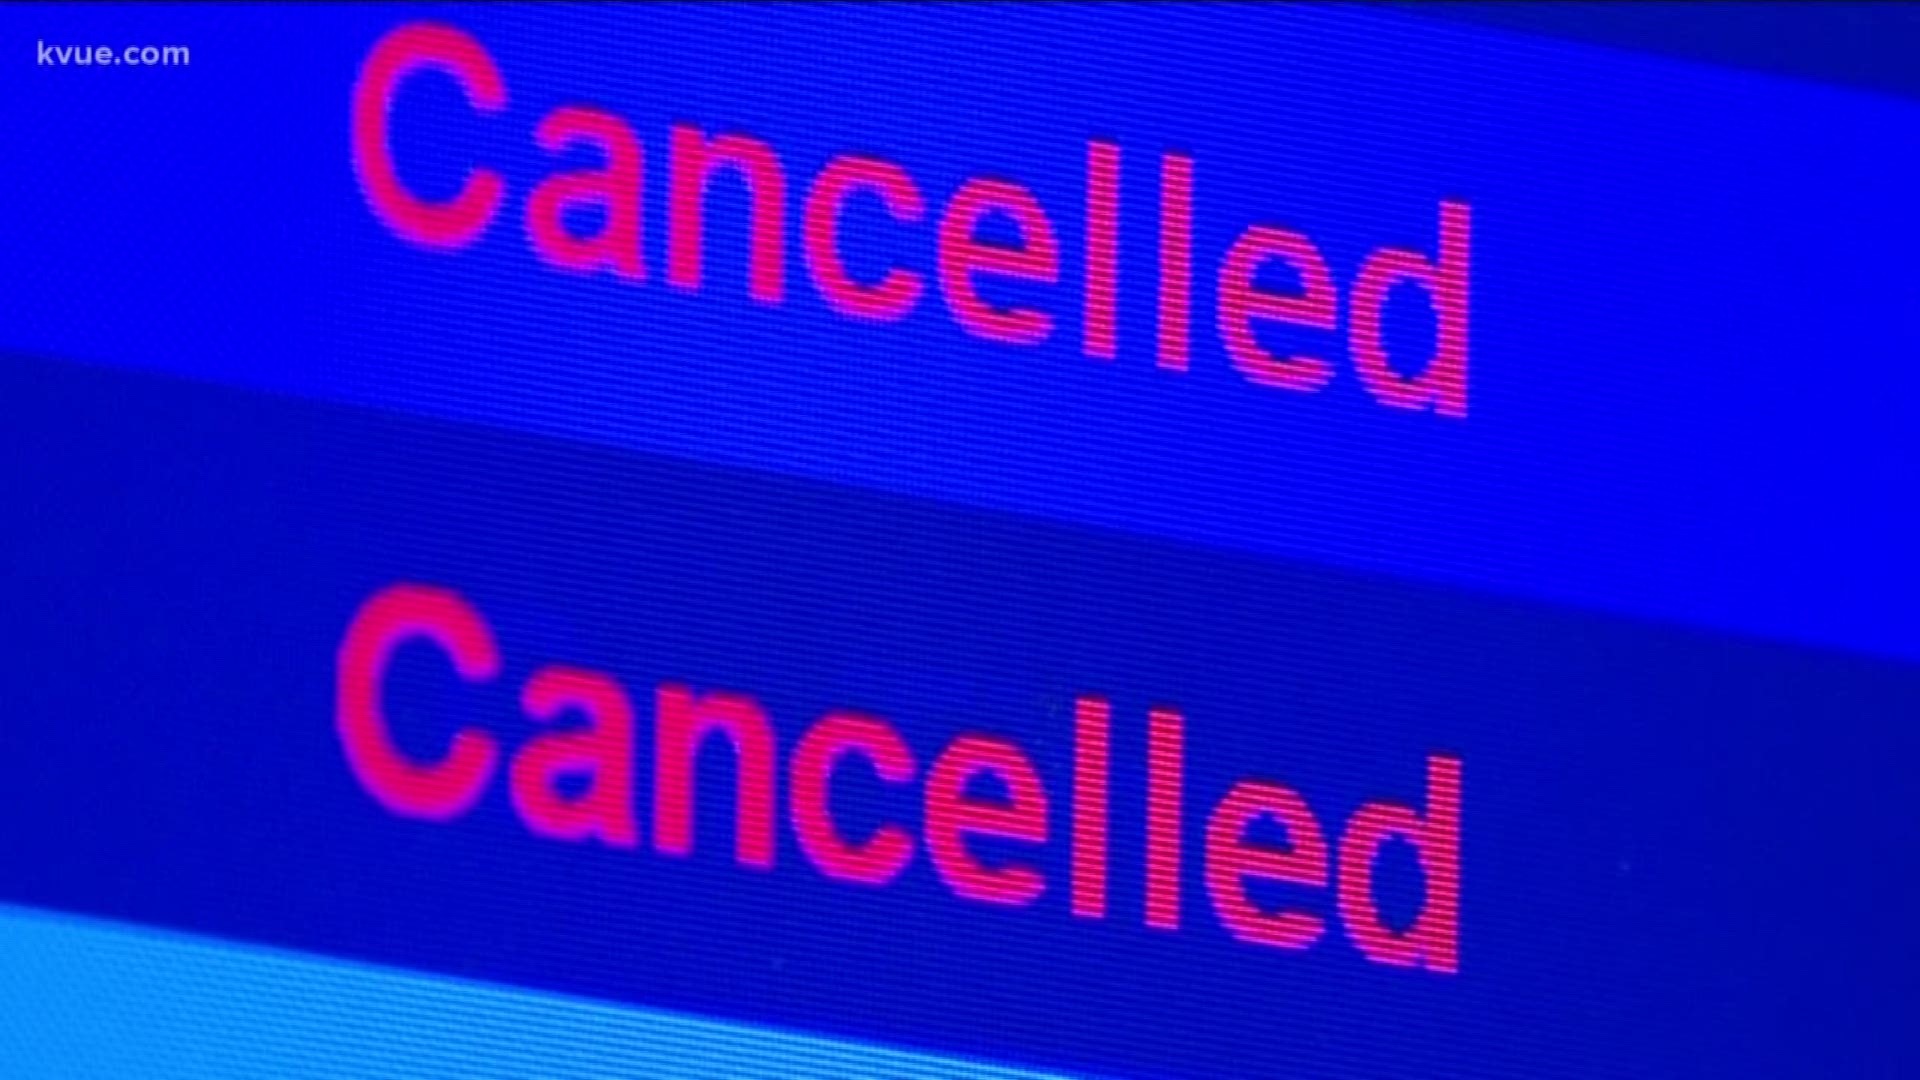 Cancellations at Austin-Bergstrom International Airport for some Southwest Airlines flights.